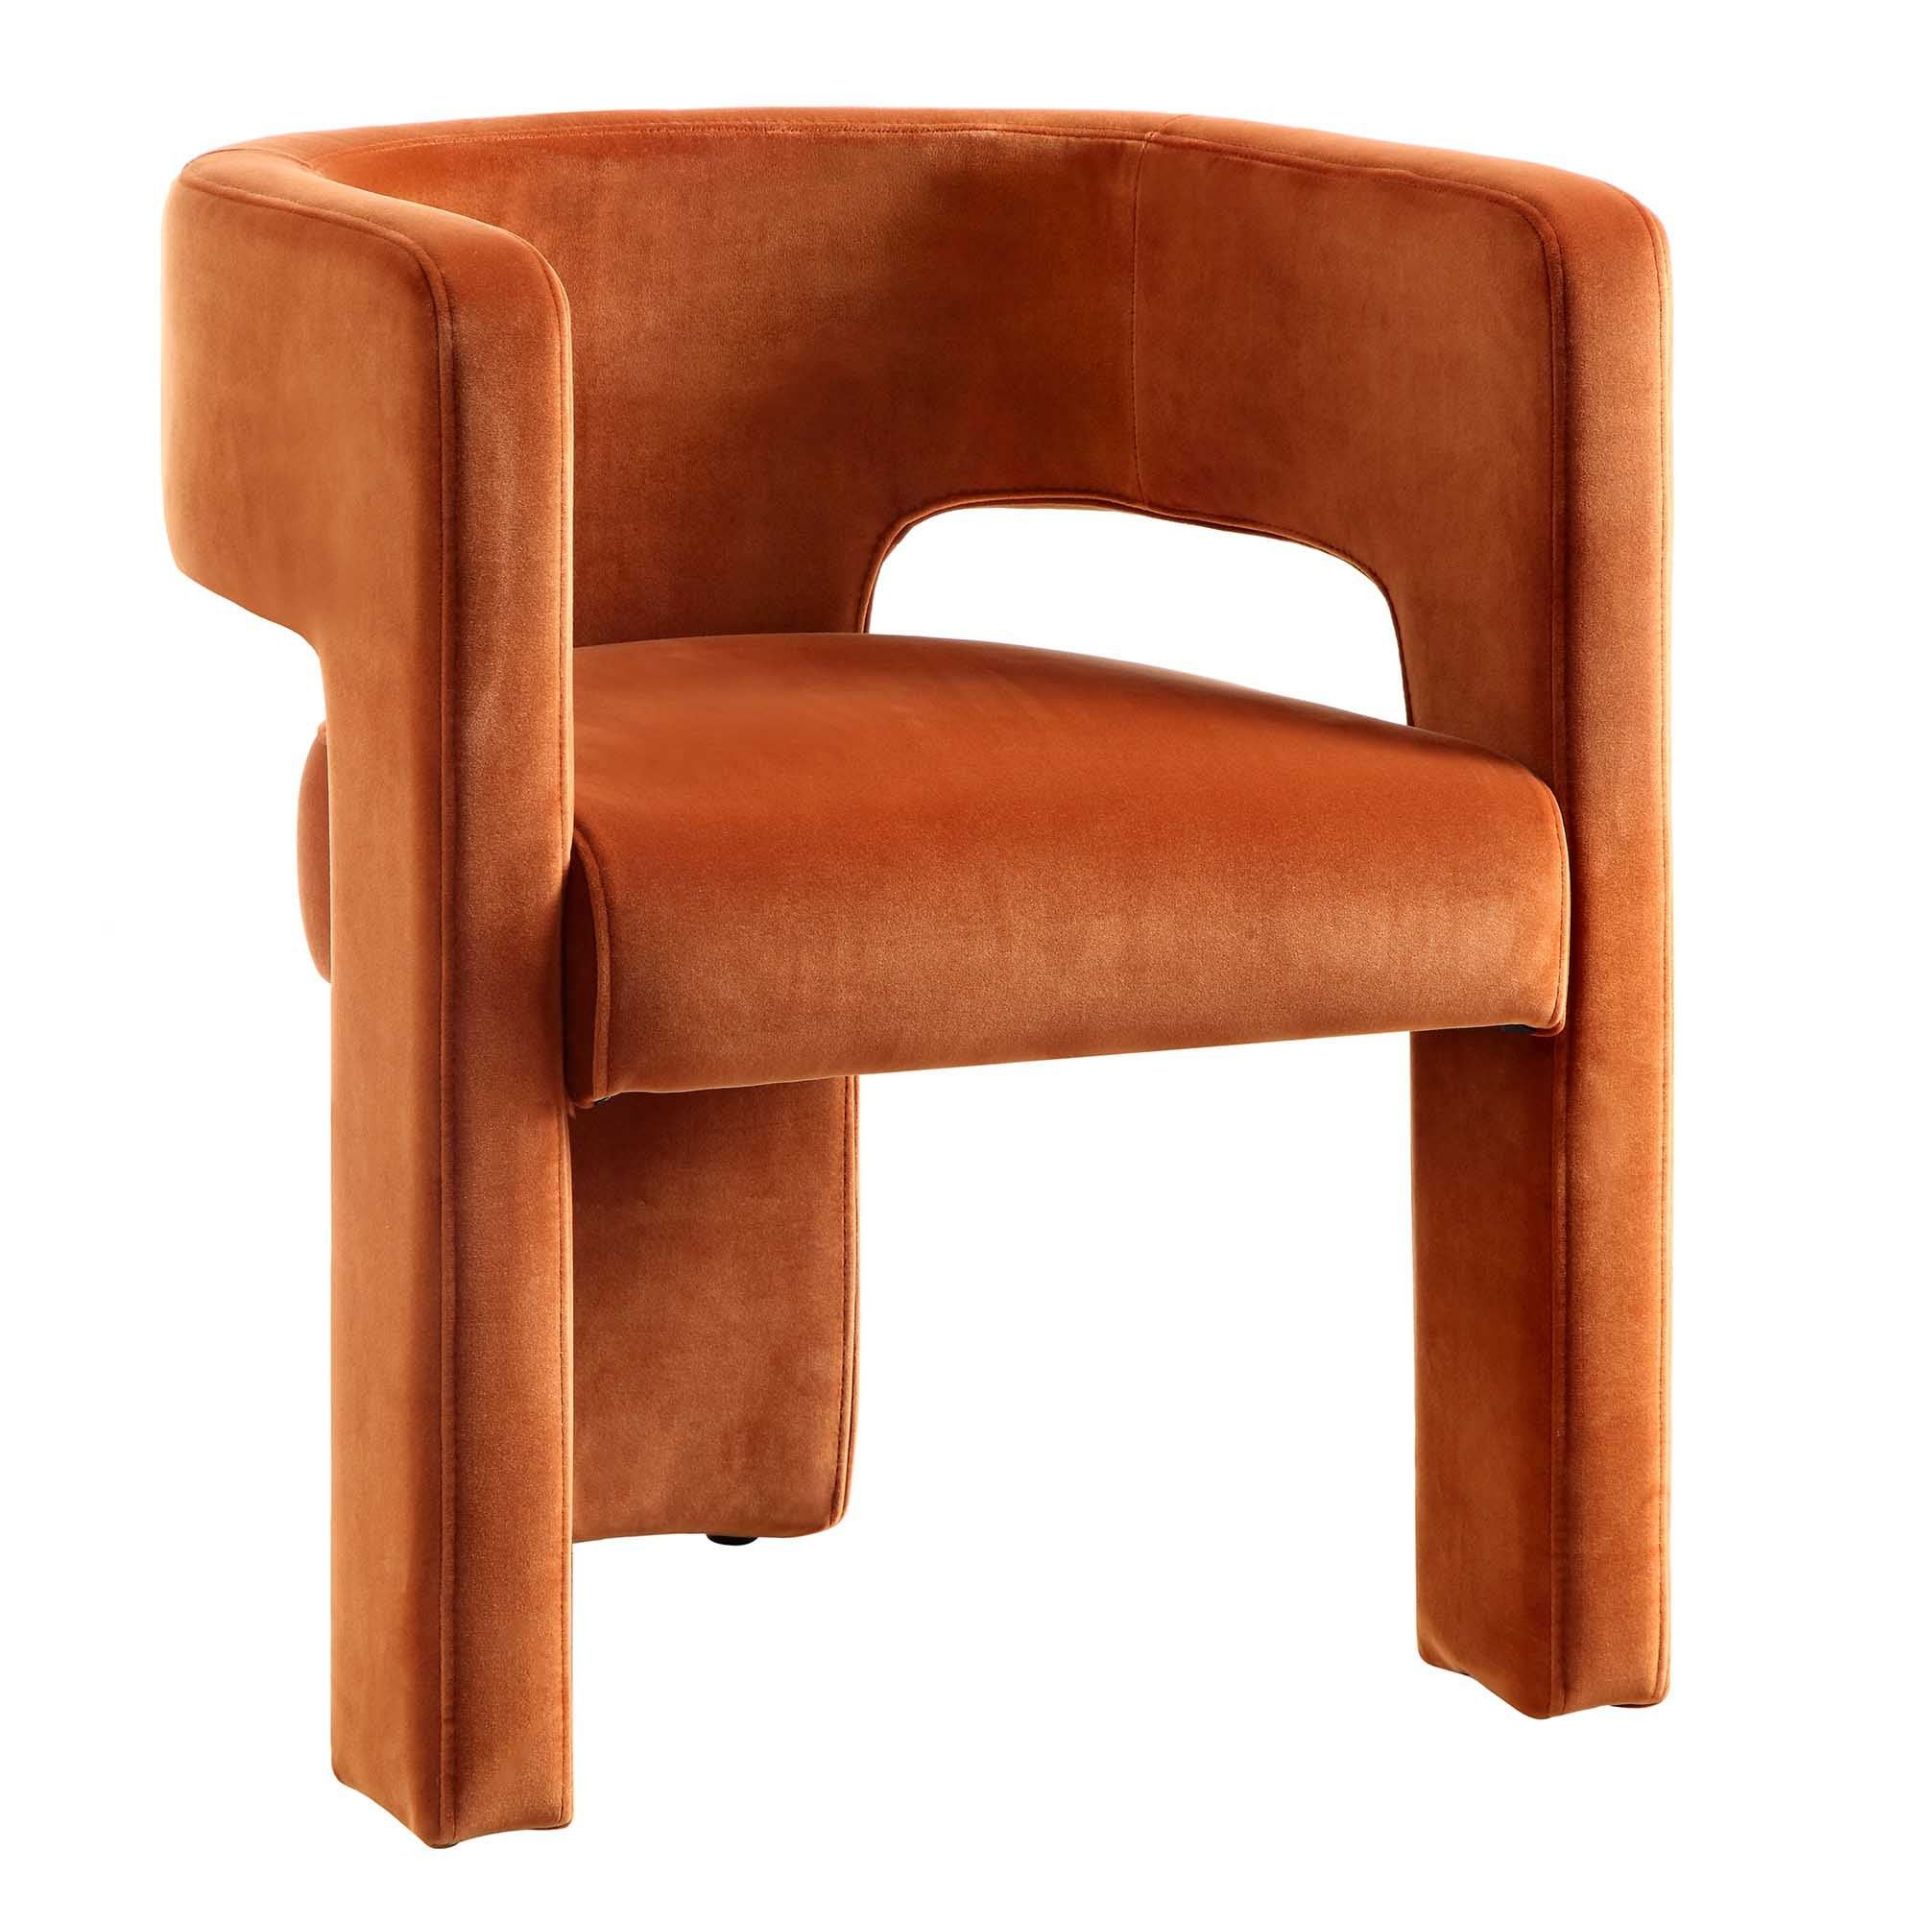 Greenwich Rust Velvet Dining Chair. - R19.4. RRP £255.99. Our beautiful Greenwich chair features - Image 2 of 2